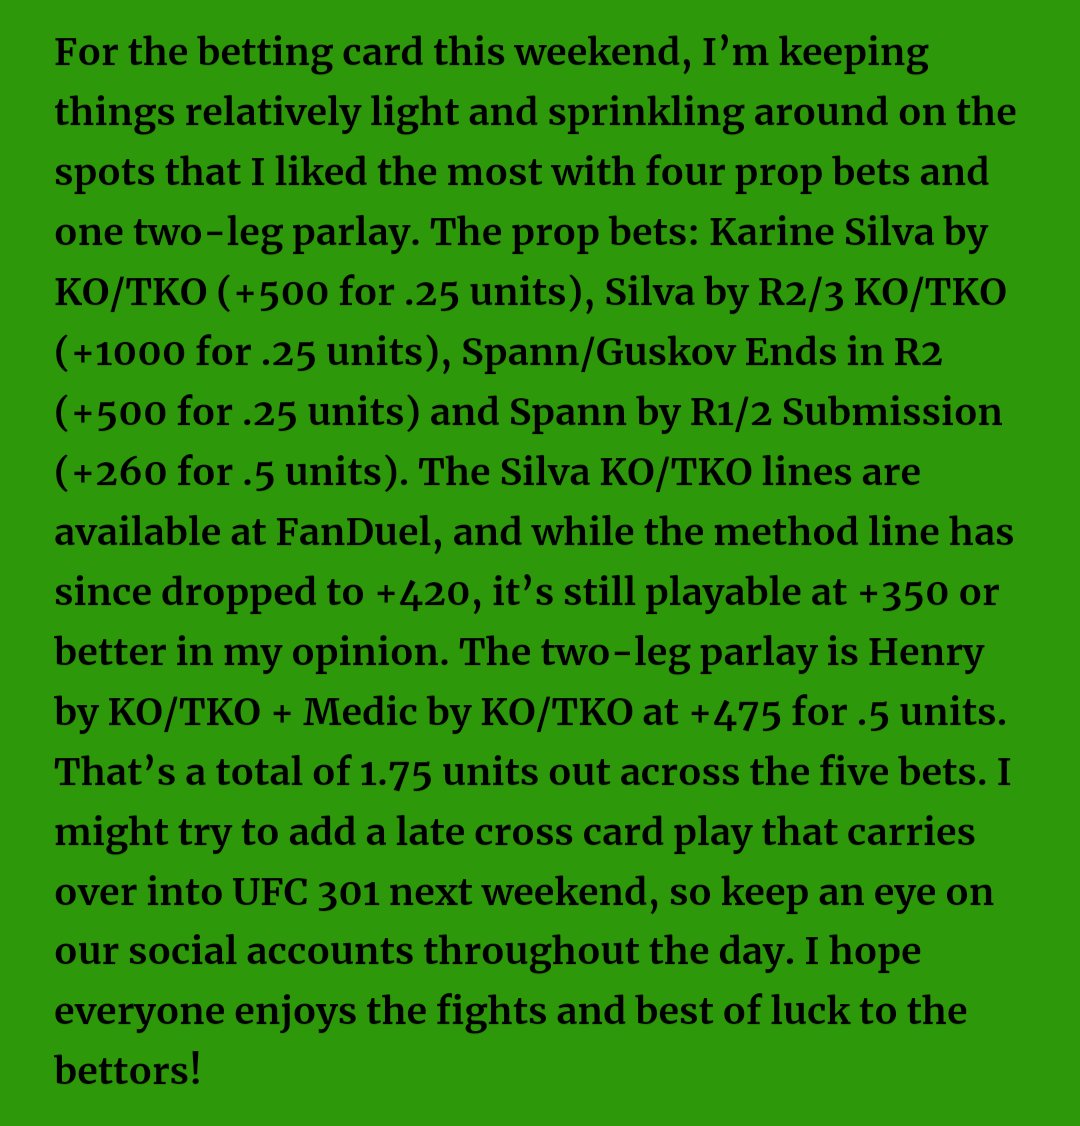 UFC Vegas 91 Quick Recap

Picks went 8-5 on the night and ended up +2.25 units on the bets. Pretty happy overall with that one and surprisingly fun card for the most part. Props to Alex Perez getting back into the win column, Karine Silva continuing her climb in the flyweight